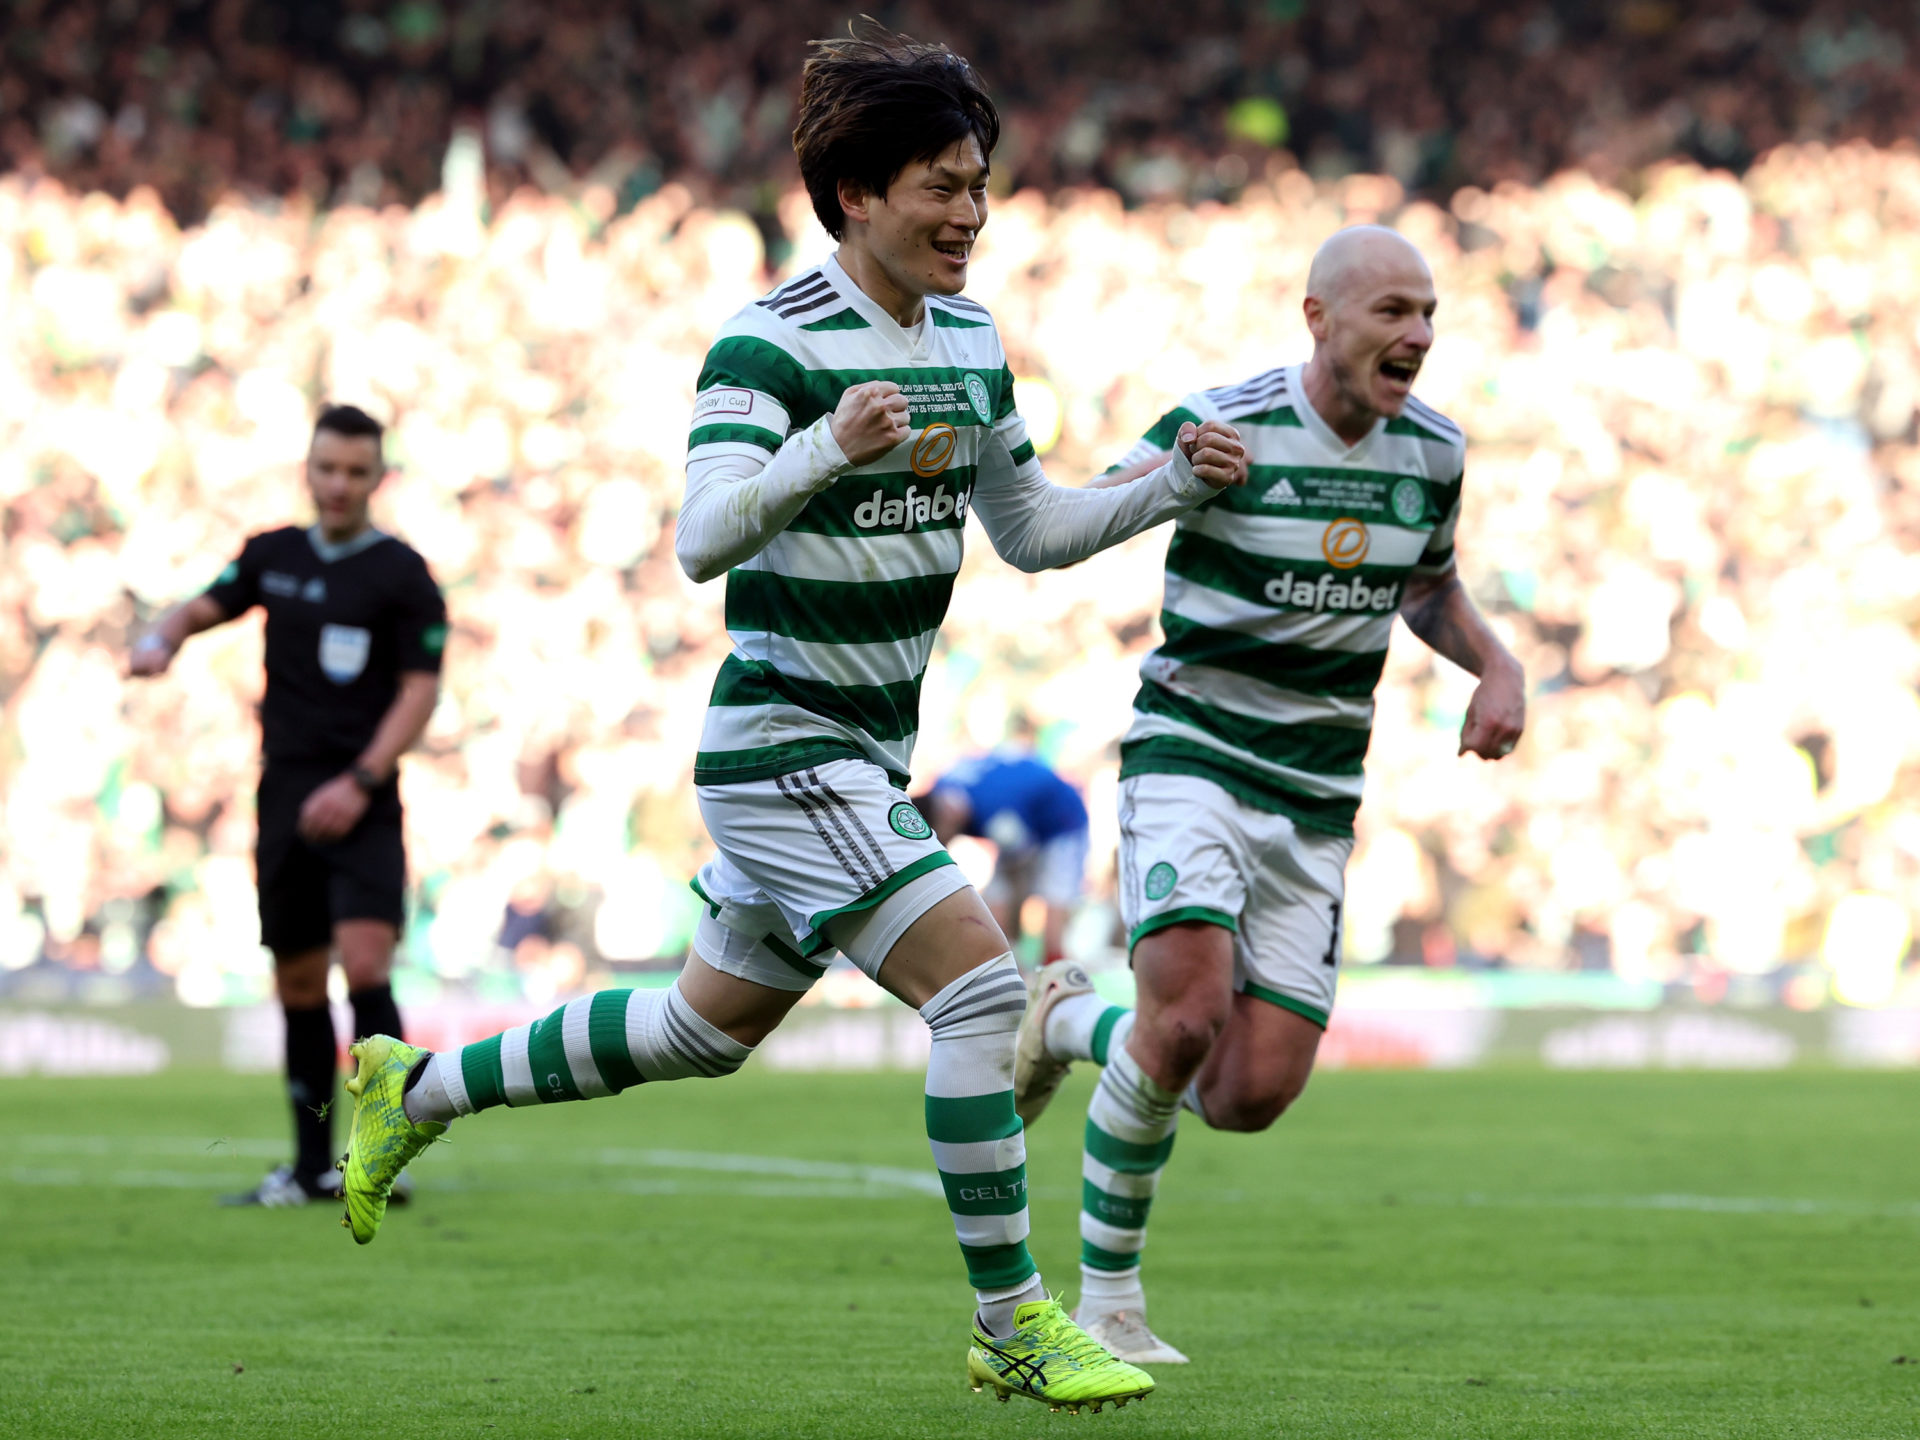 Celtic came out on top against Rangers last time out